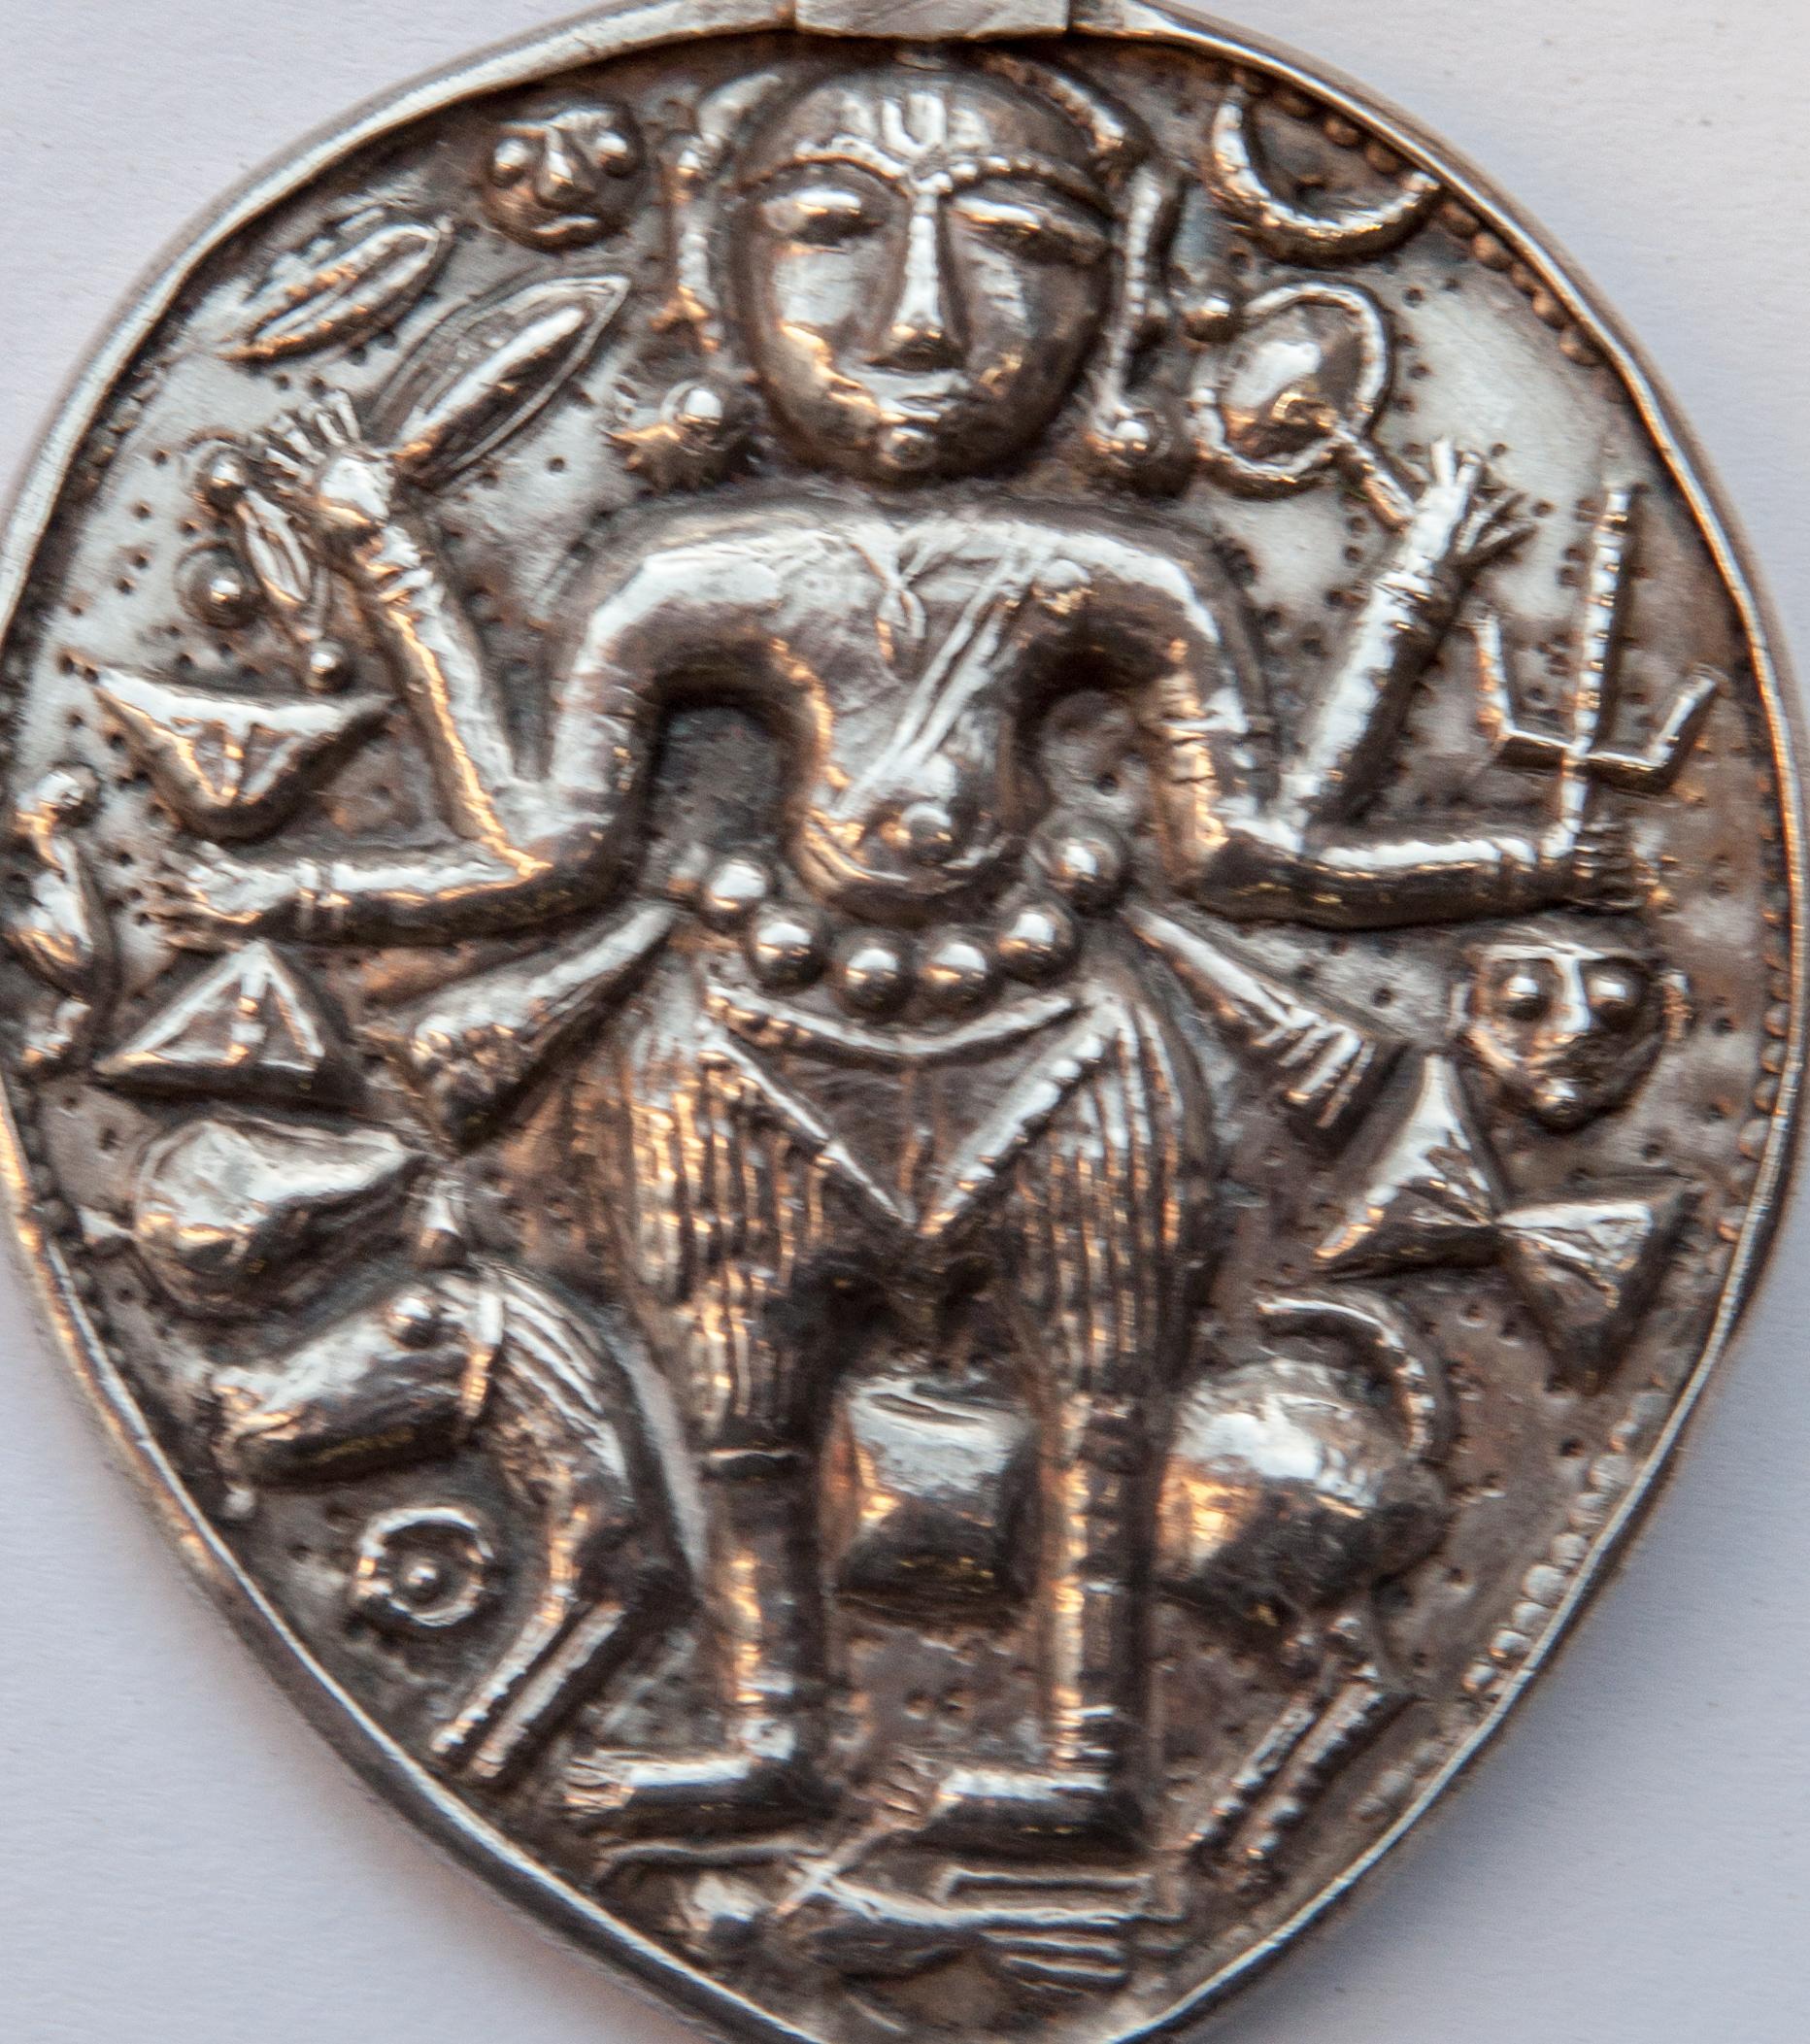 Repoussé Tribal Silver Pendant from India Depicting Kali, Repousse Work, Mid-20th Century